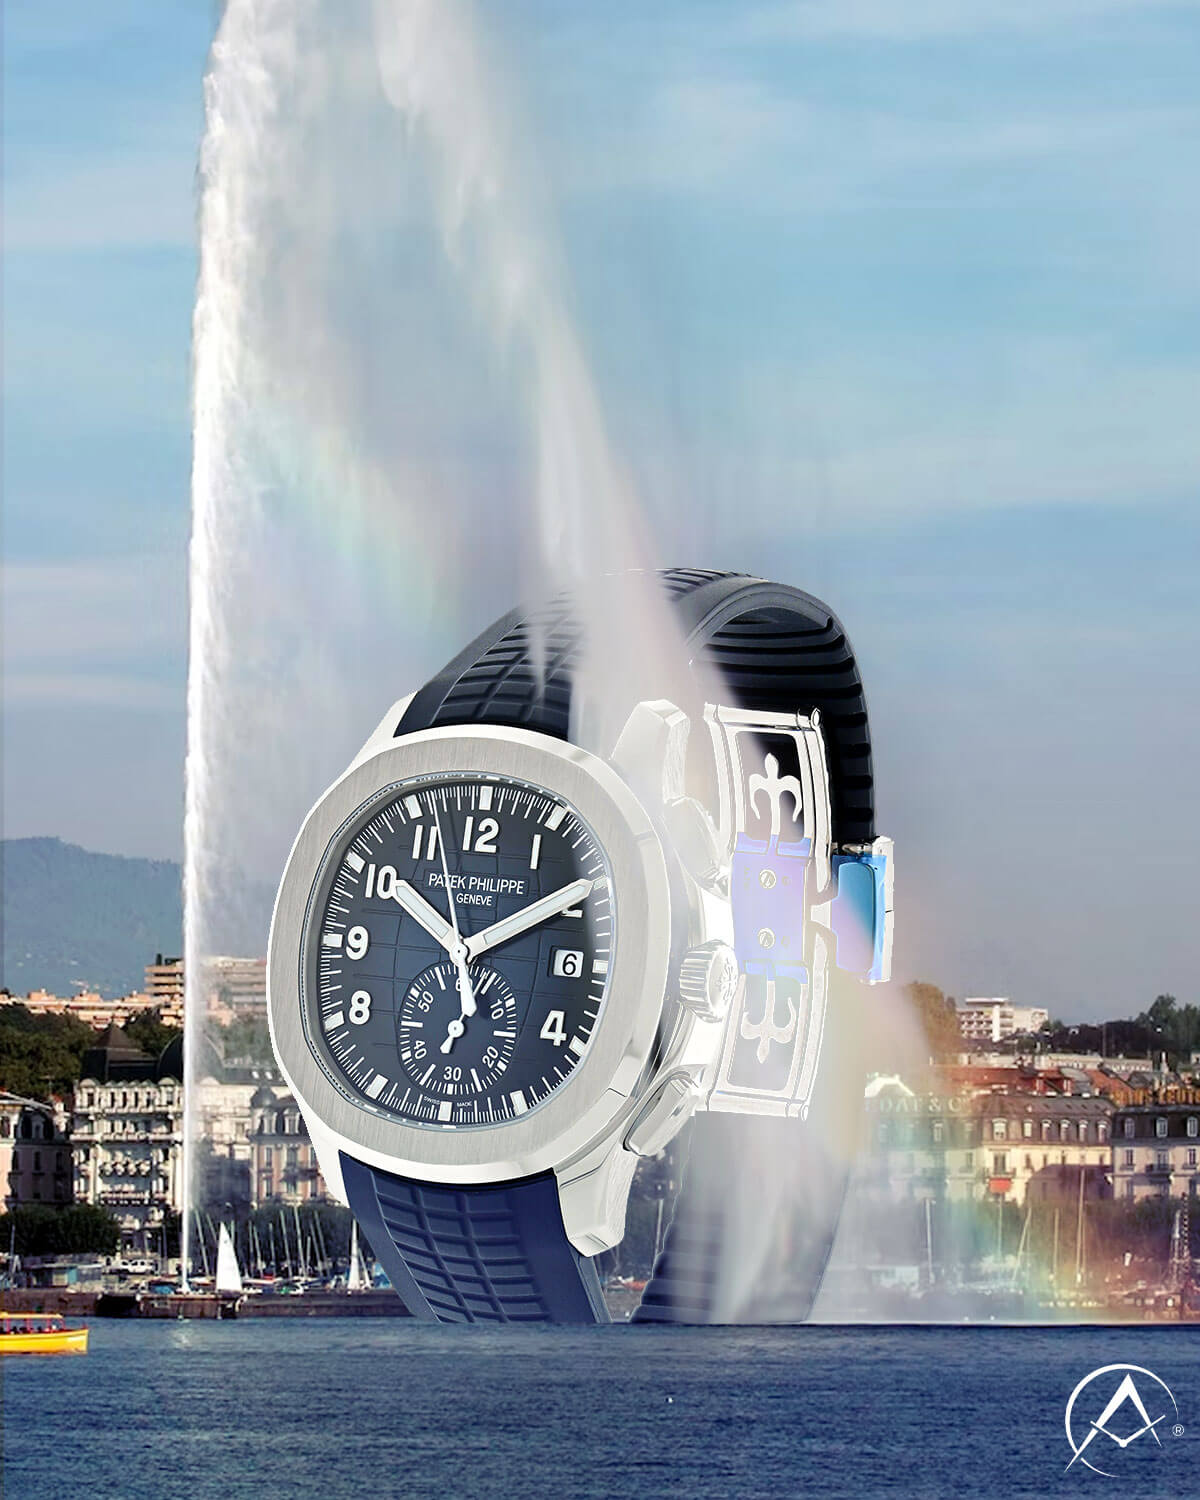 Blue Dial, Sterling Silver Bezel, and Blue Rubber Strap Timepiece Sits in Ocean with Fountain Spraying Over it